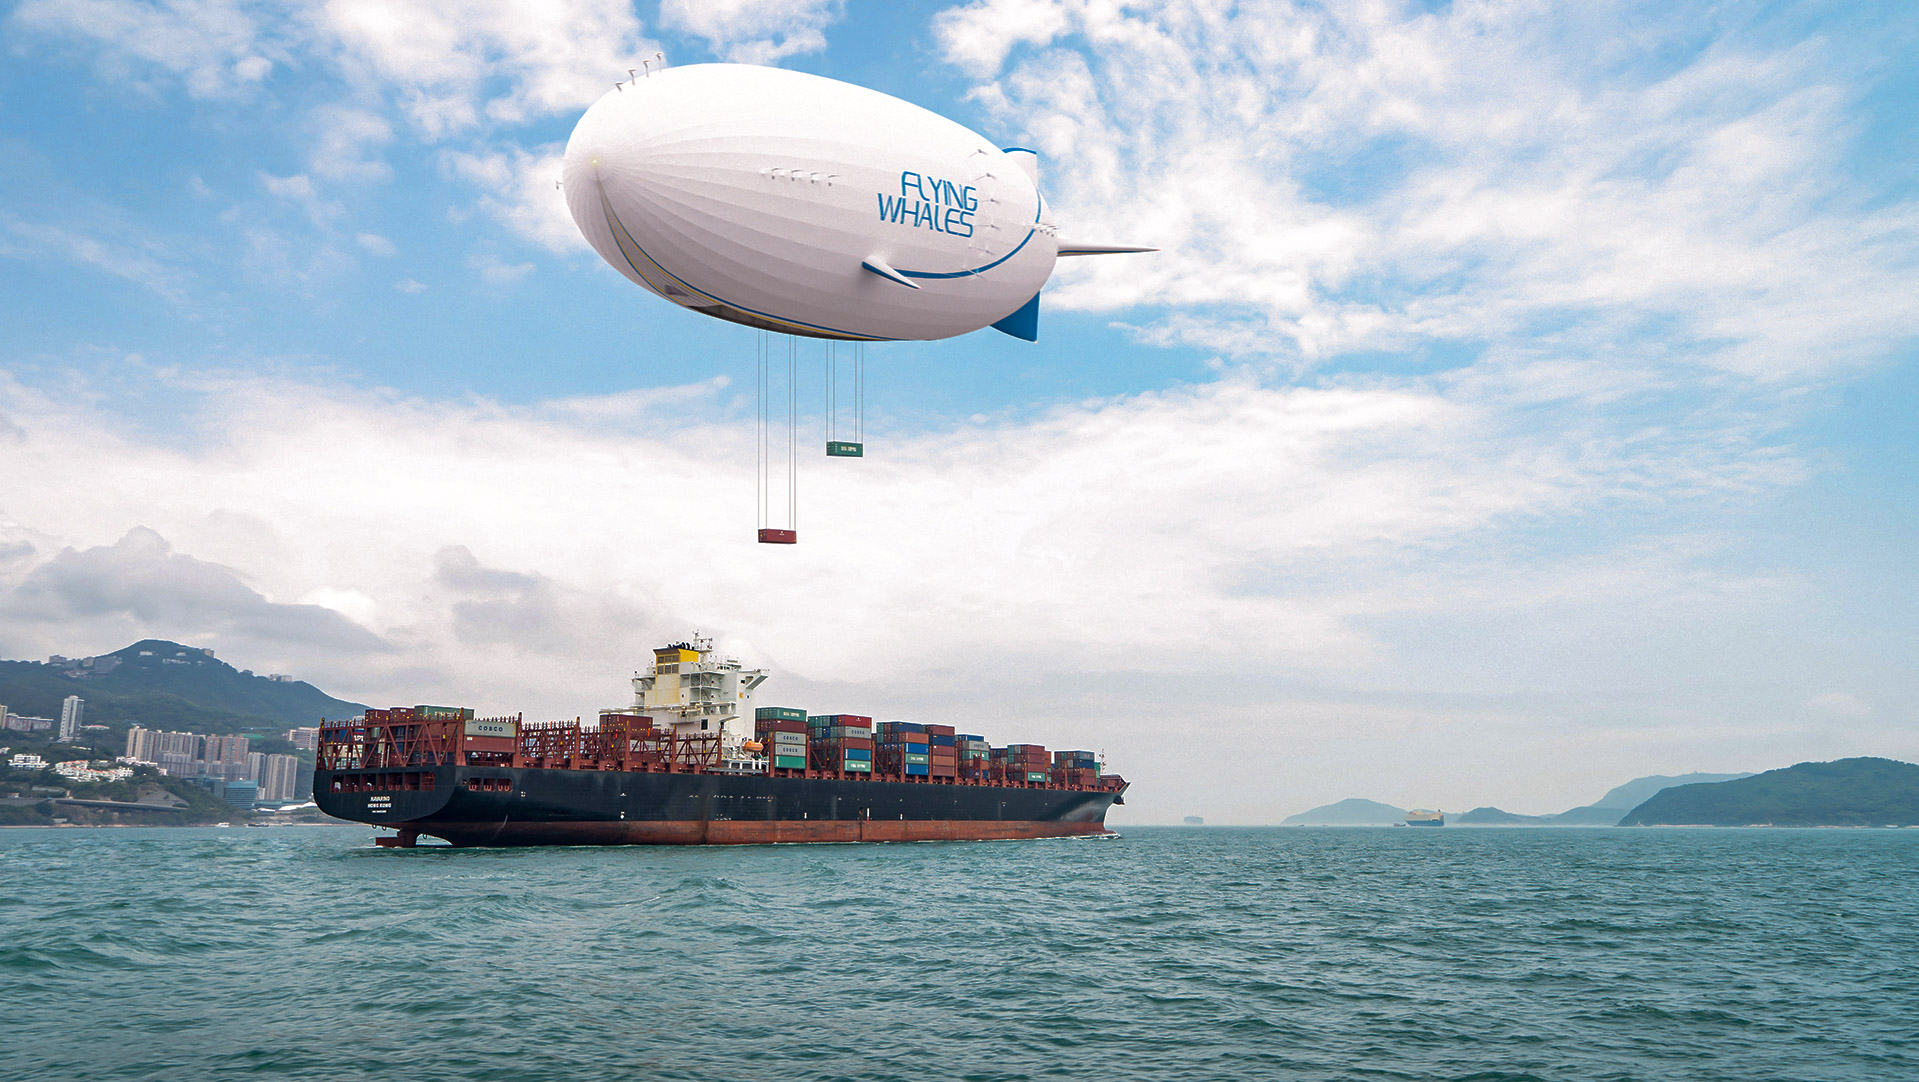 artists&#039; rendering of a blimp carrying cargo containers to a container ship in a harbor